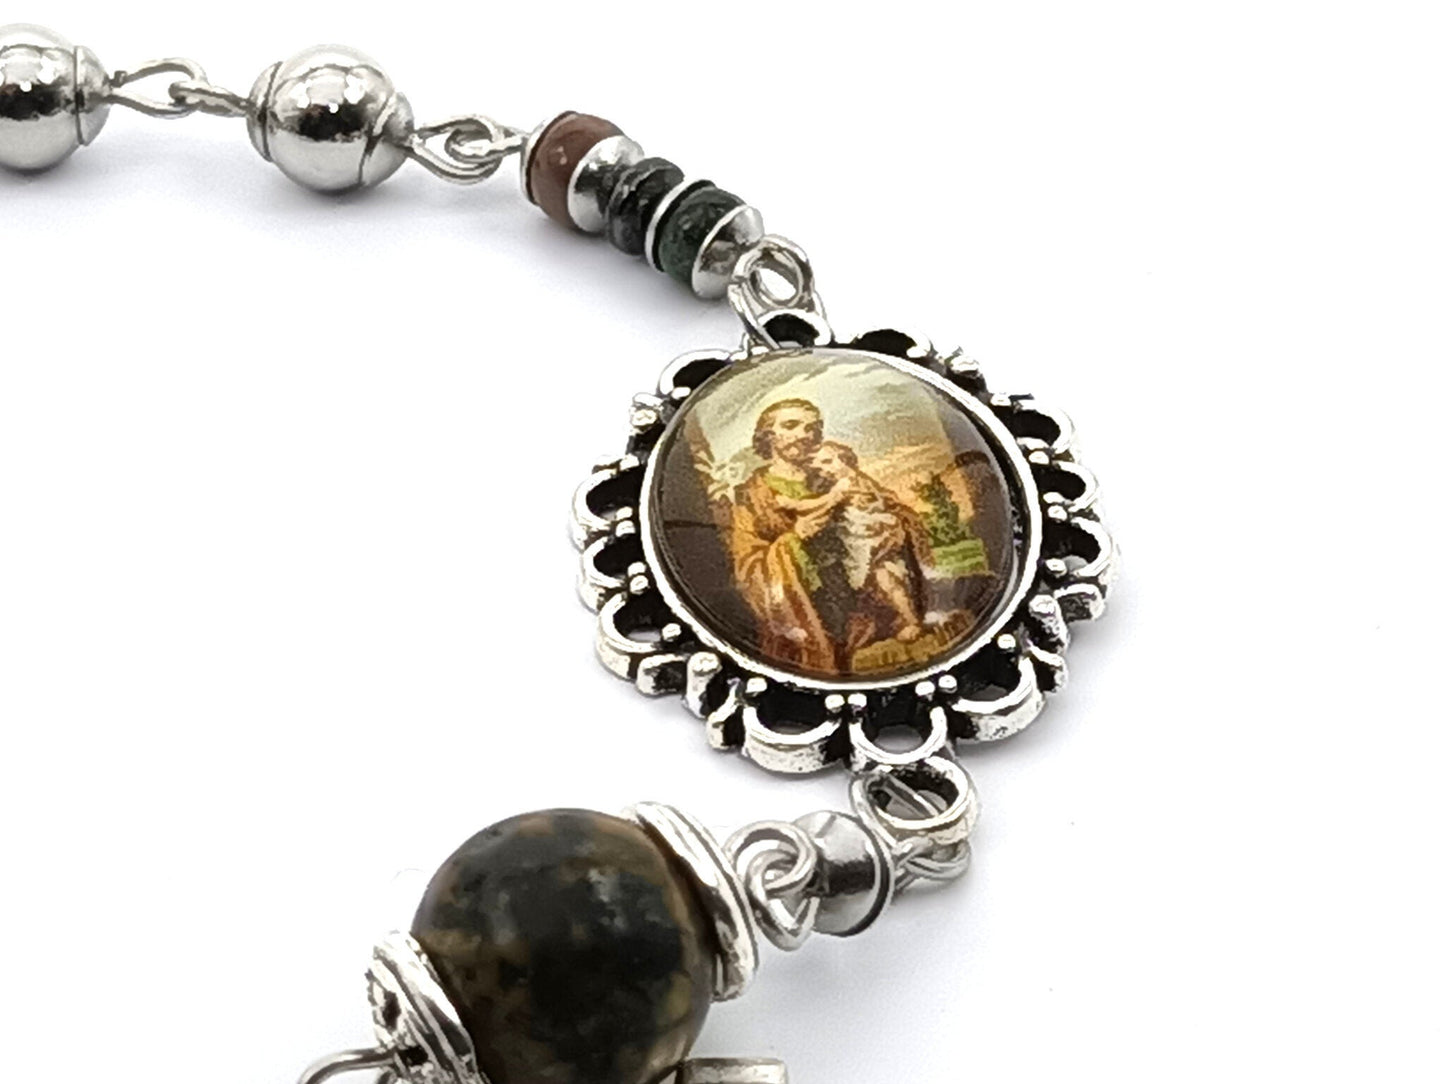 Saint Joseph unique rosary beads single decade with stainless steel beads, silver crucifix and St. Joseph picture medal.